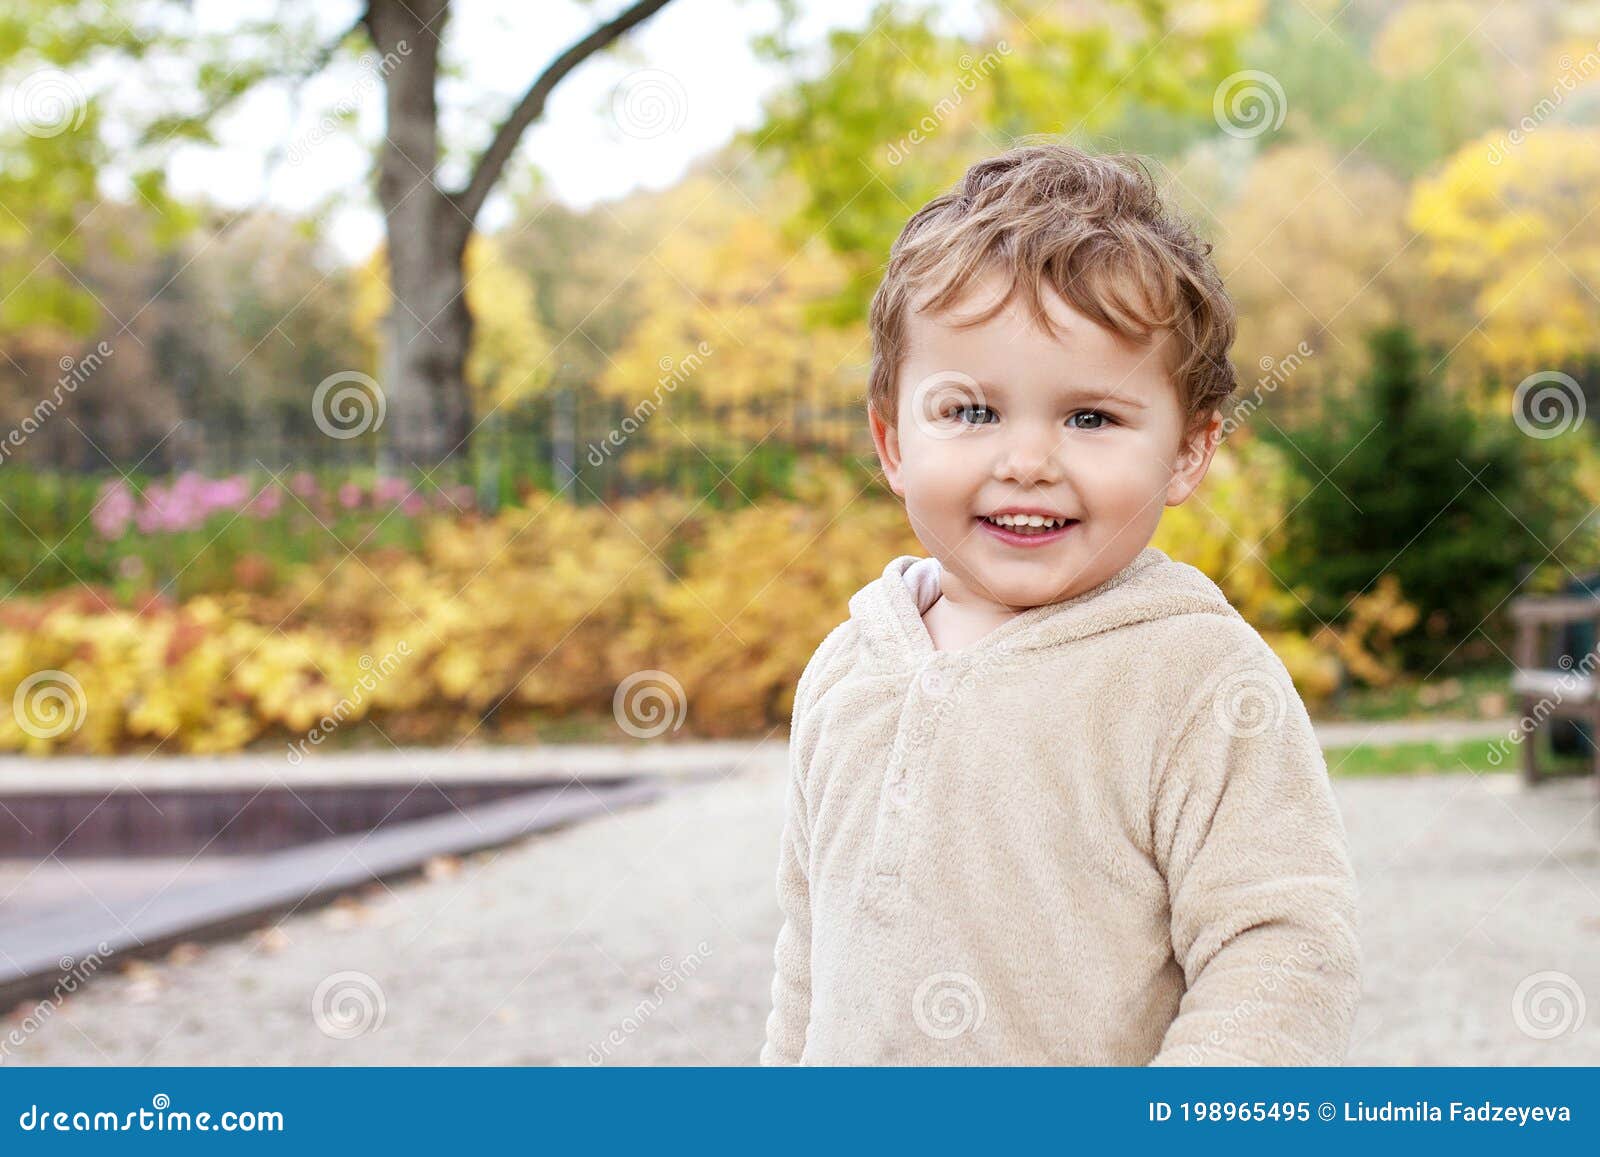 portrait of cute  little  boy. happy lovley child looking at camera